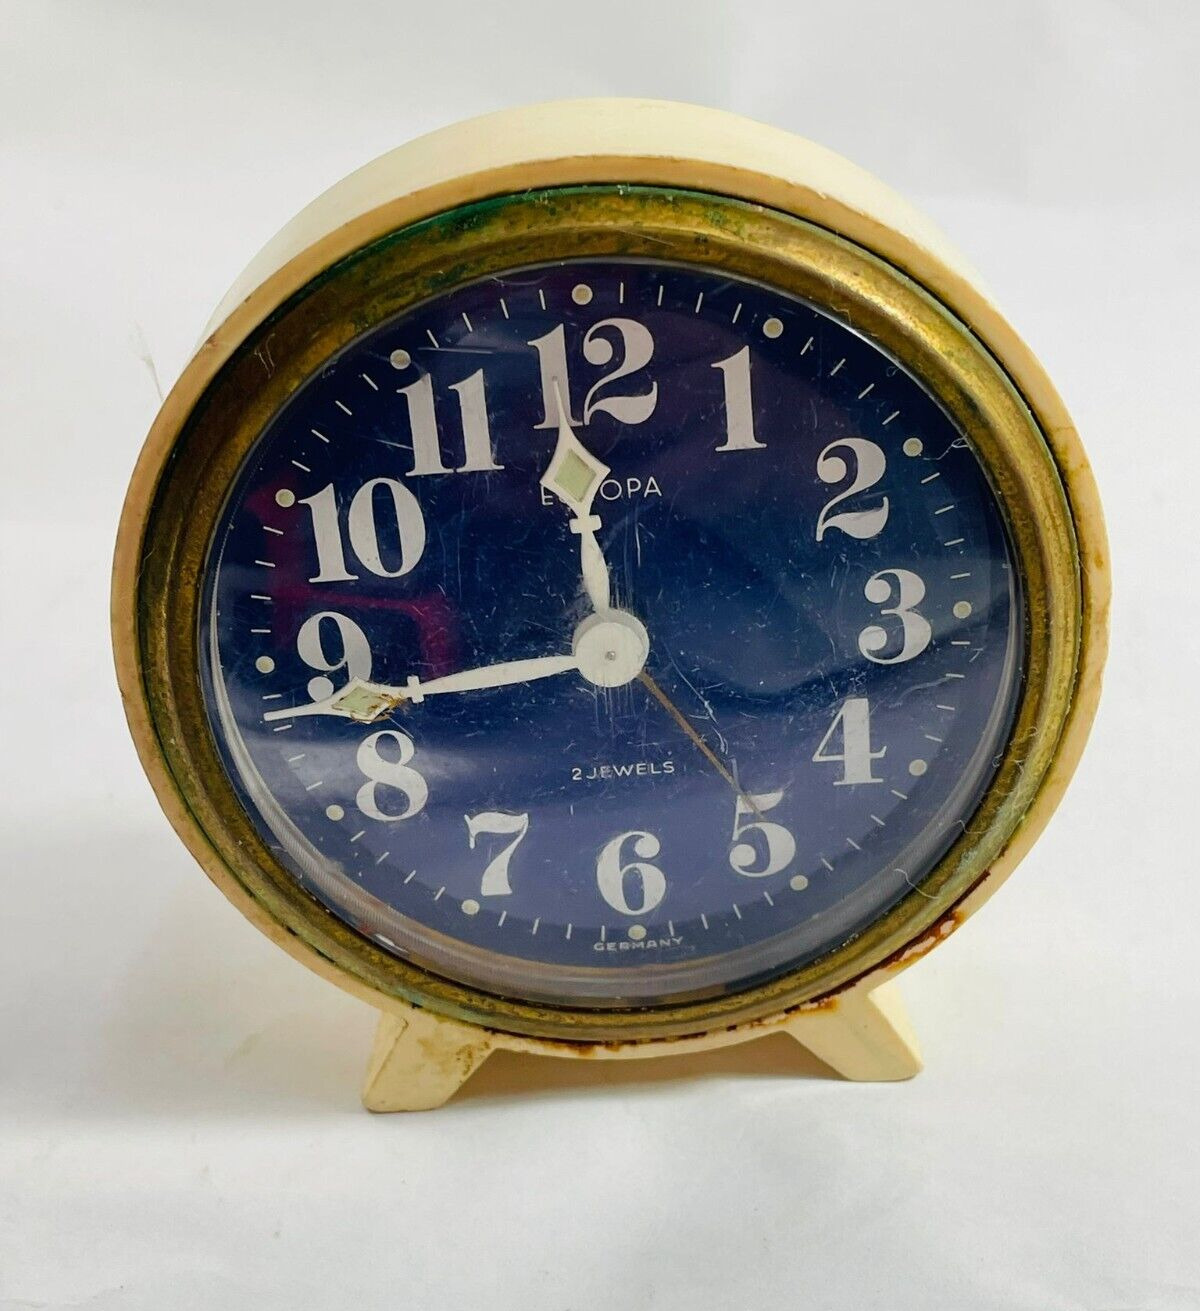 Beautiful old German alarm clock from Europe for antique lovers